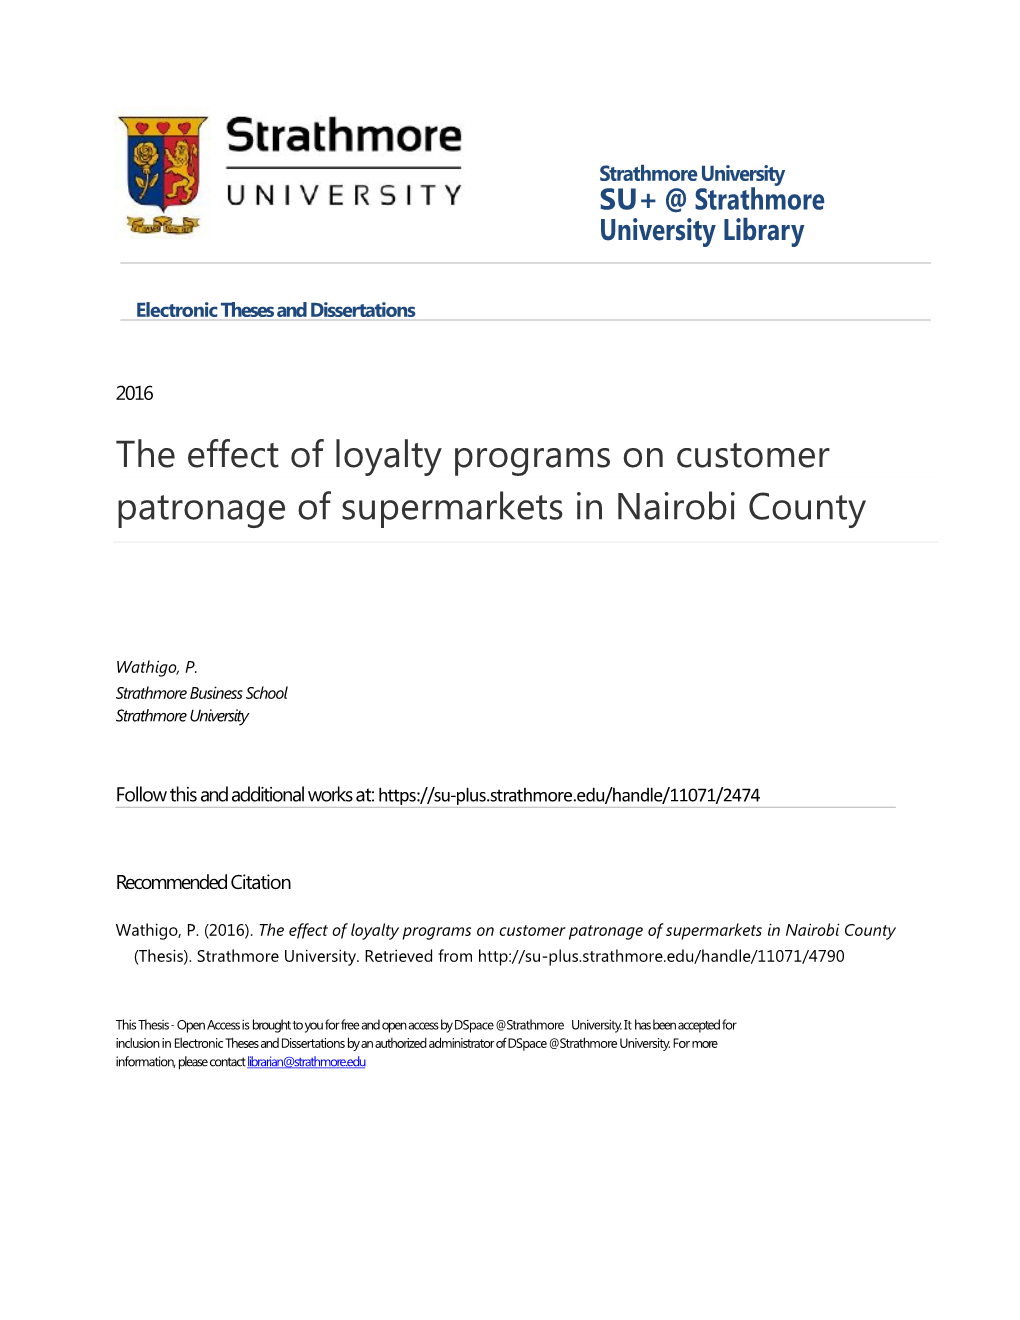 The Effect of Loyalty Programs on Customer Patronage of Supermarkets in Nairobi County